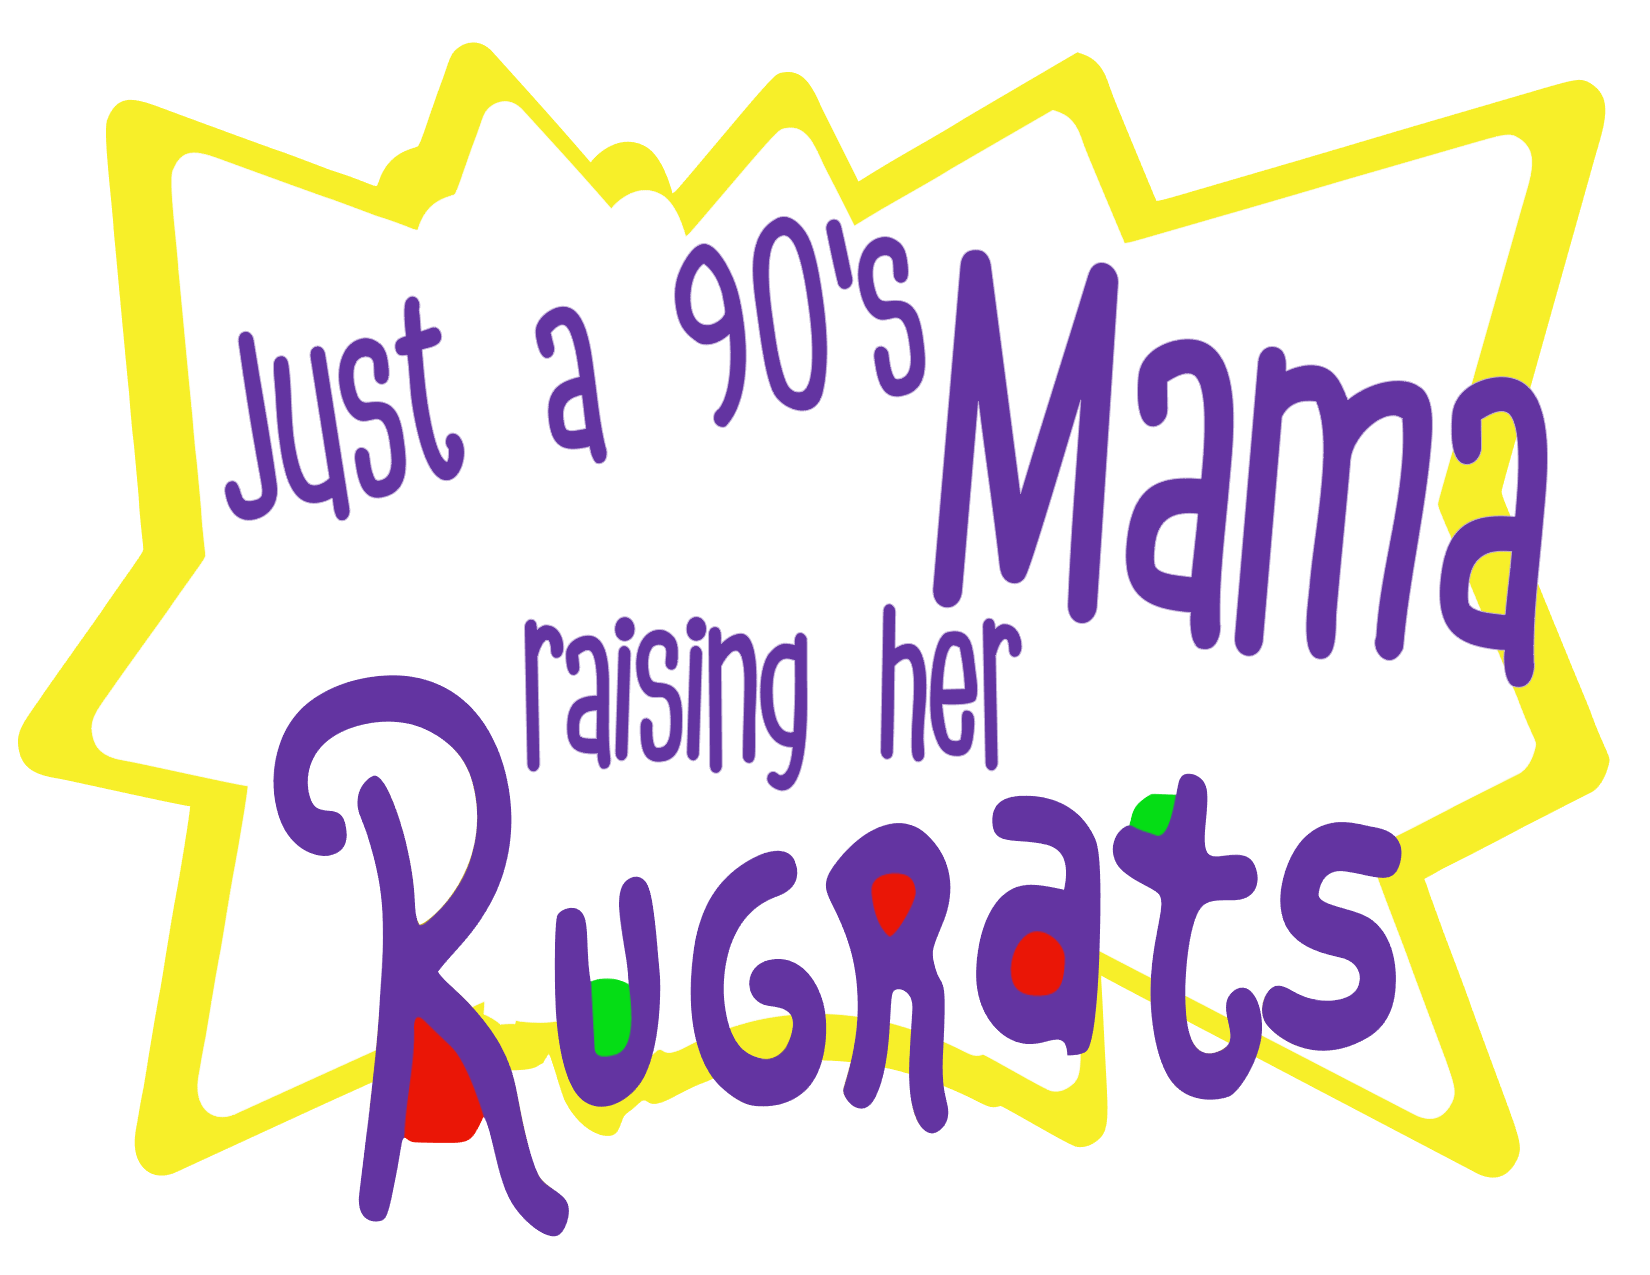 #328 Just a 90's Mama raising her Rugrats